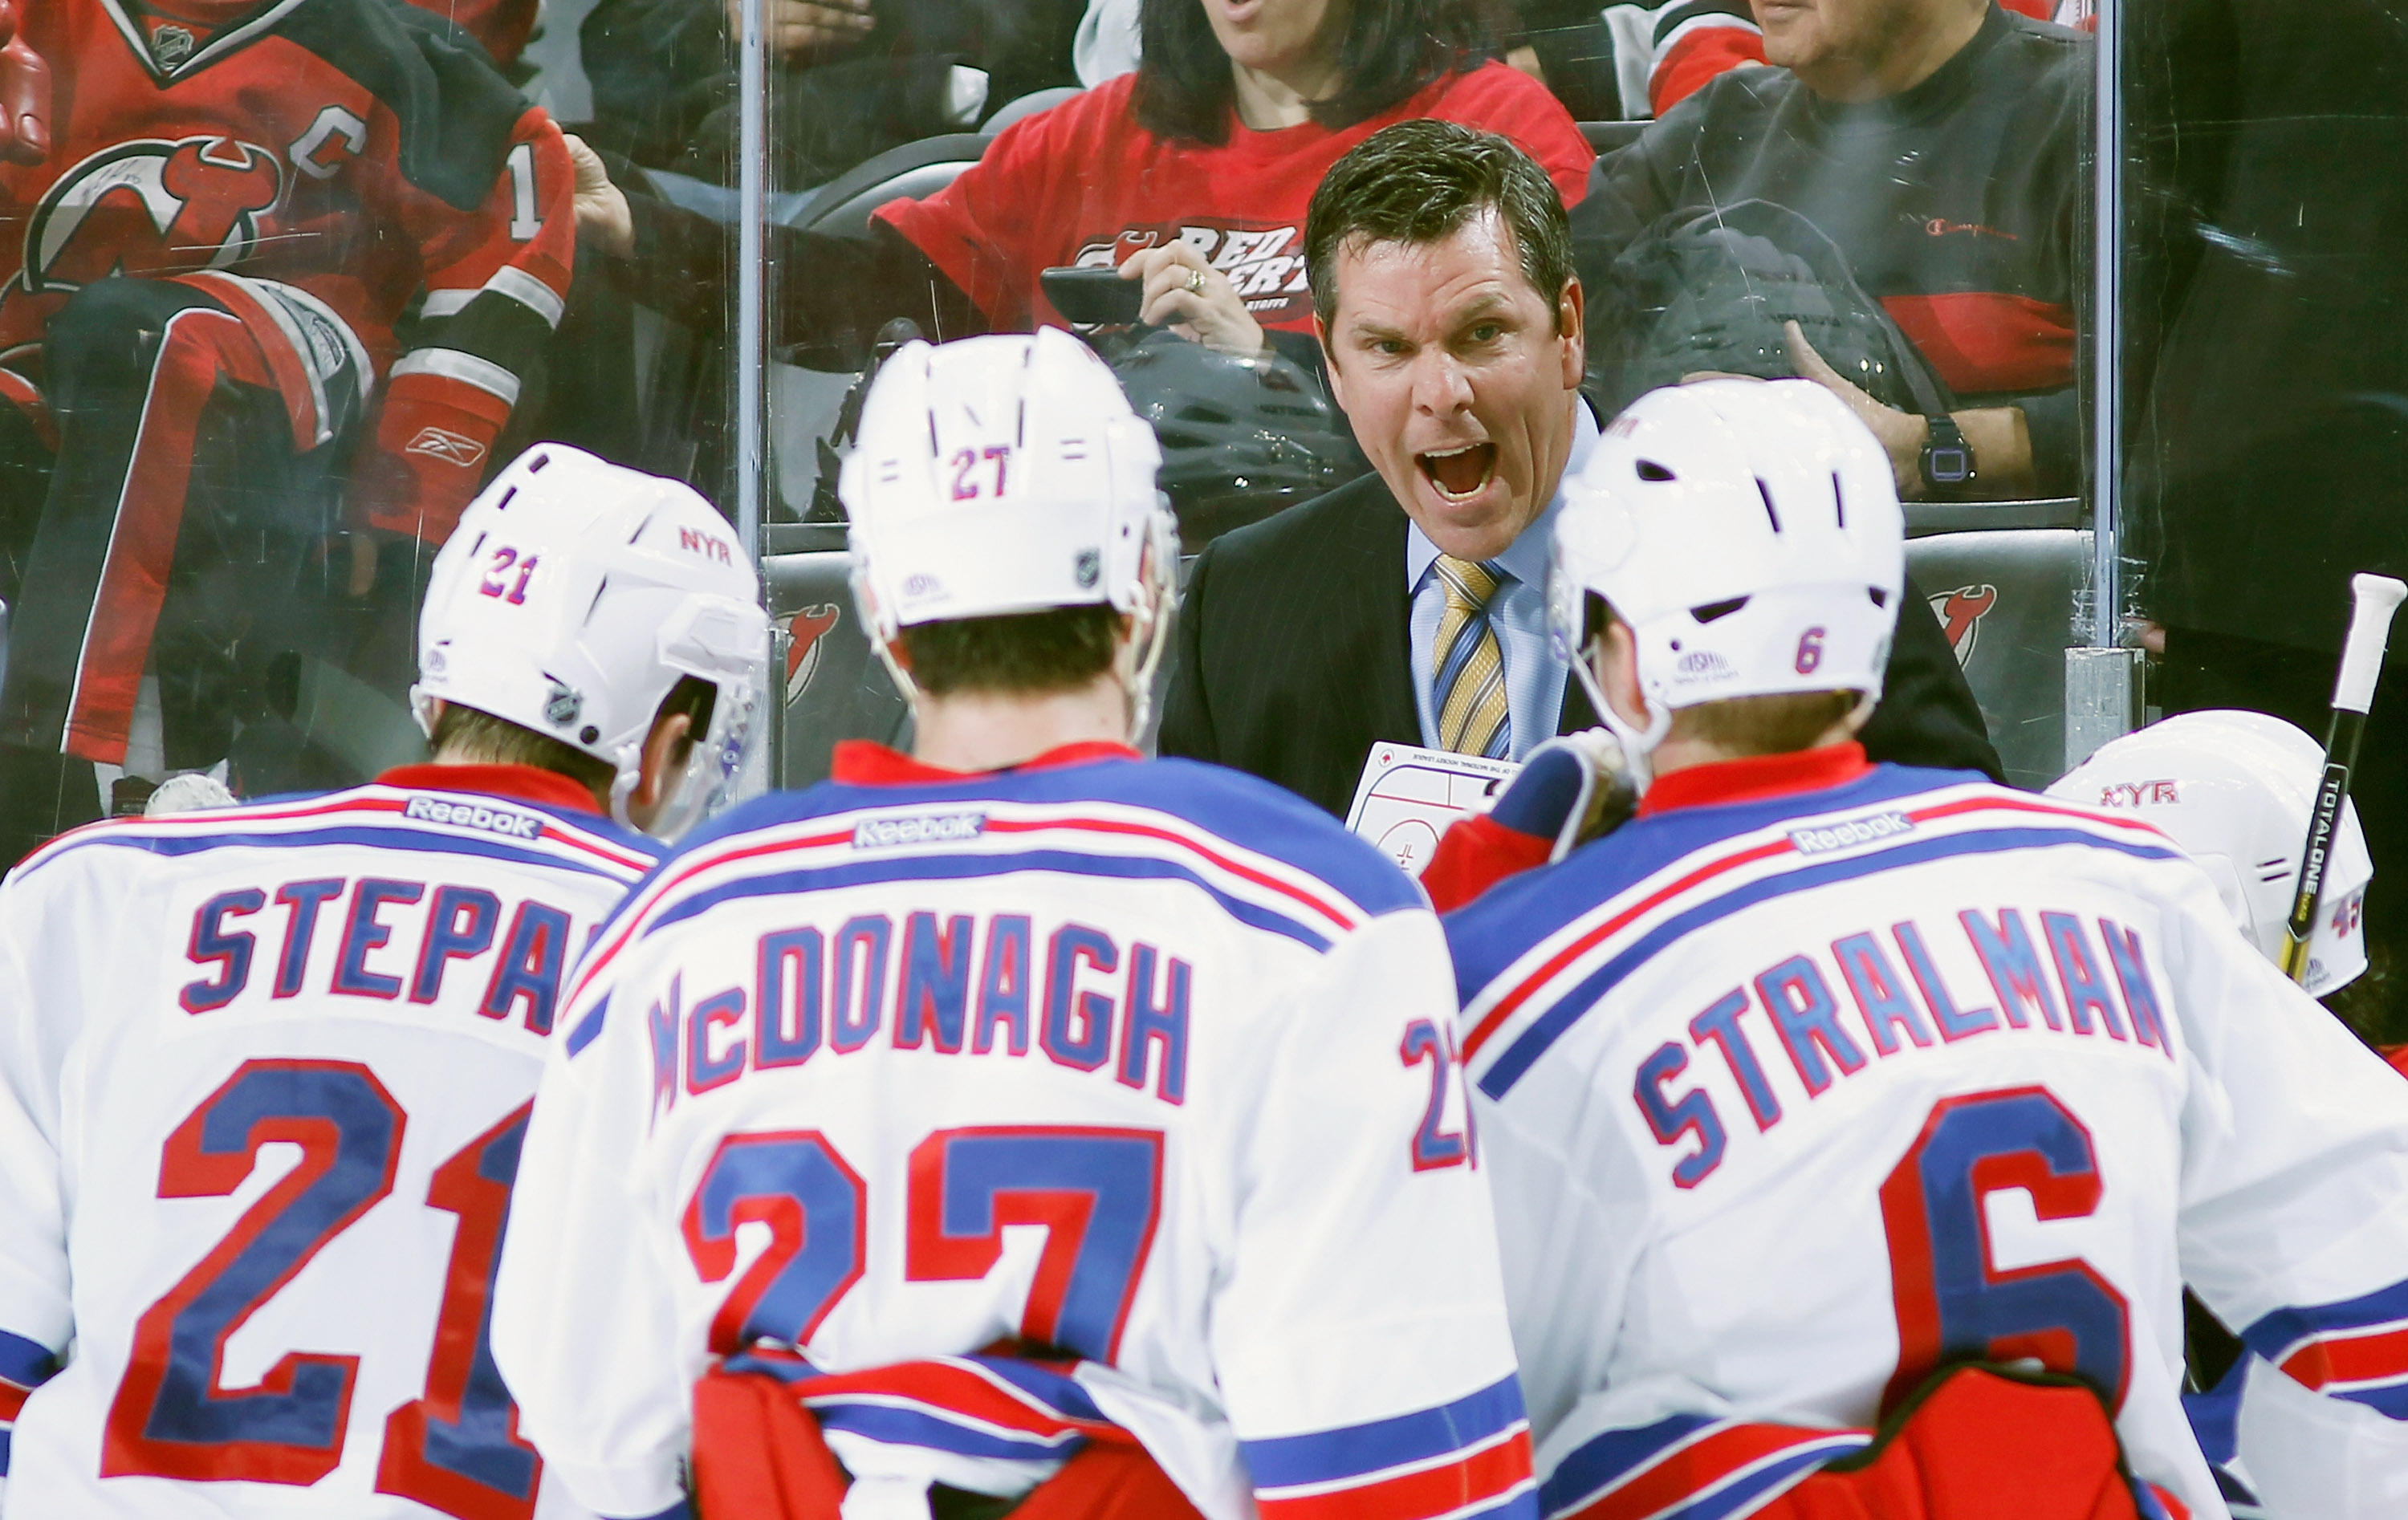 NEWARK, NJ - FEBRUARY 05: Assistant coach Mike Sullivan of the New York Rangers gives instructions against the New Jersey Devils during the game at the Prudential Center on February 5, 2013 in Newark, New Jersey. (Photo by Andy Marlin/NHLI via Getty Images)